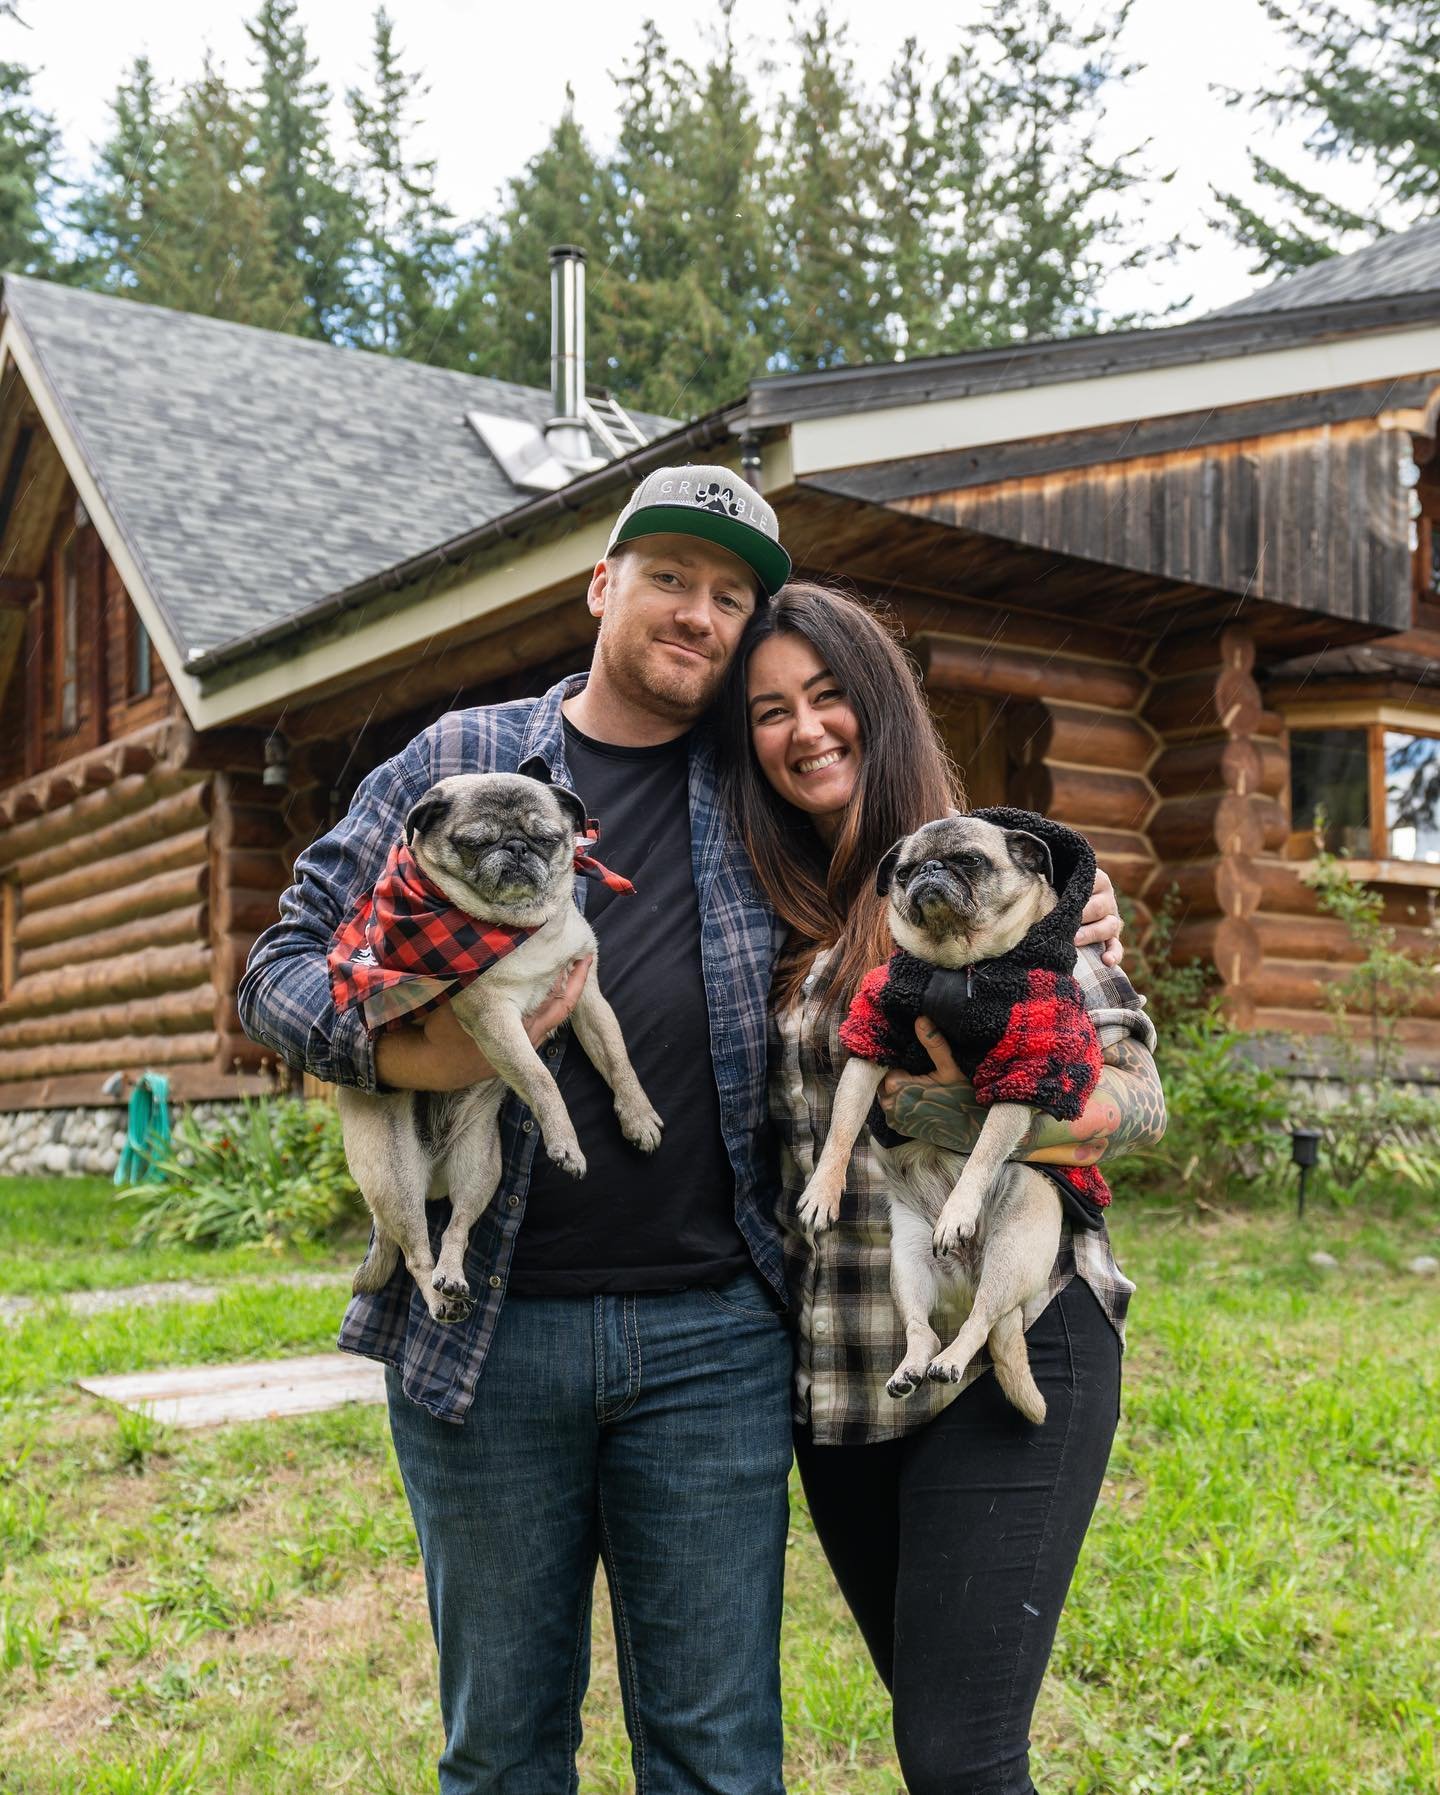 Jesse, the girls &amp; I recently moved into the dreamiest, most beautiful rustic log cabin on approx. 18 acres of mountain forest directly above Kootenay Lake! 🌿

The miraculous opportunity to move into this cabin on this property came into our liv